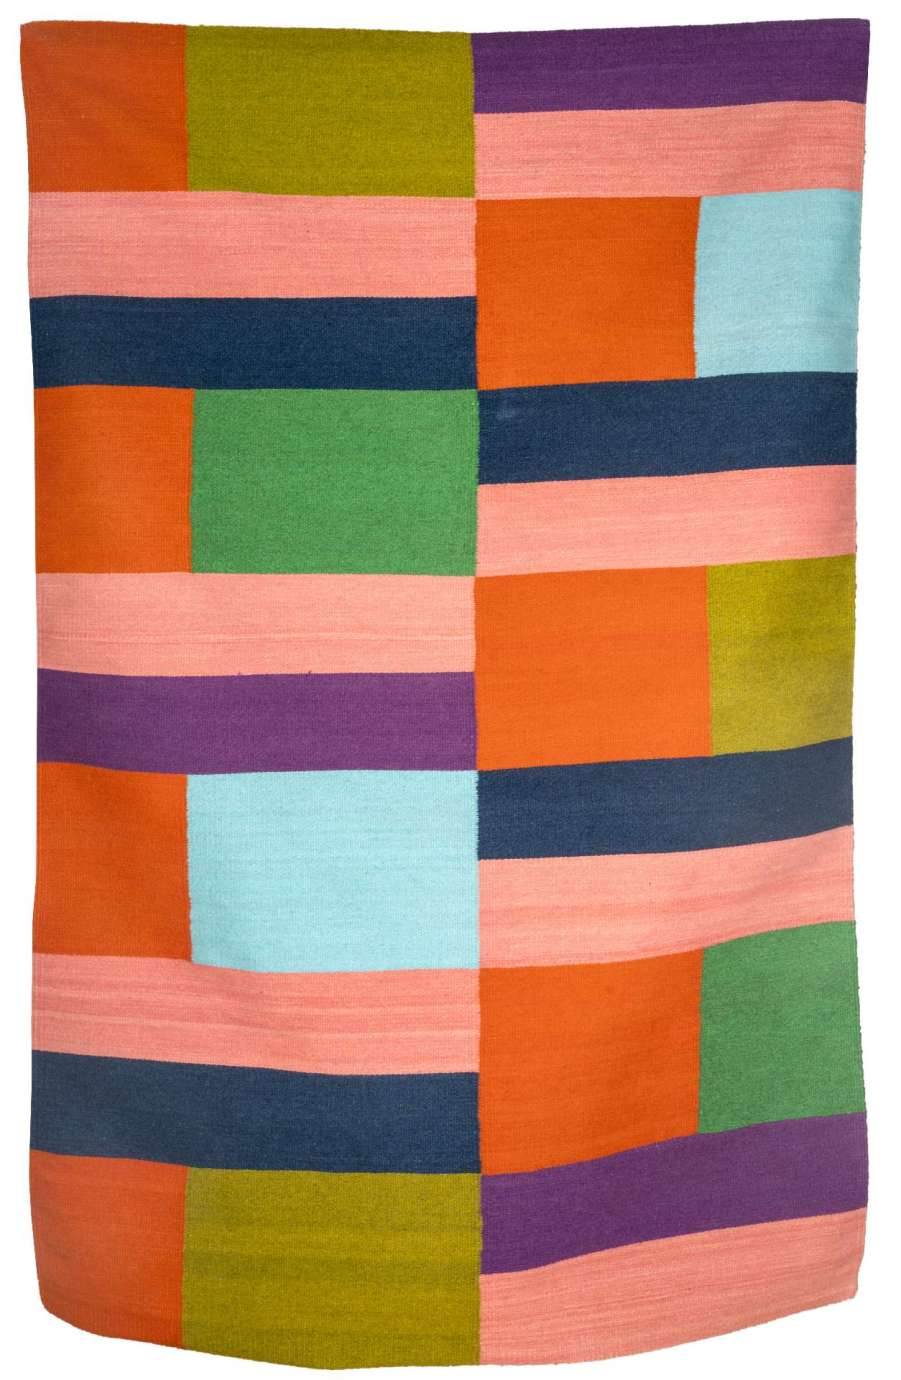 A colorful textile made of different colored rectangles and square shapes by Martha Clippinger